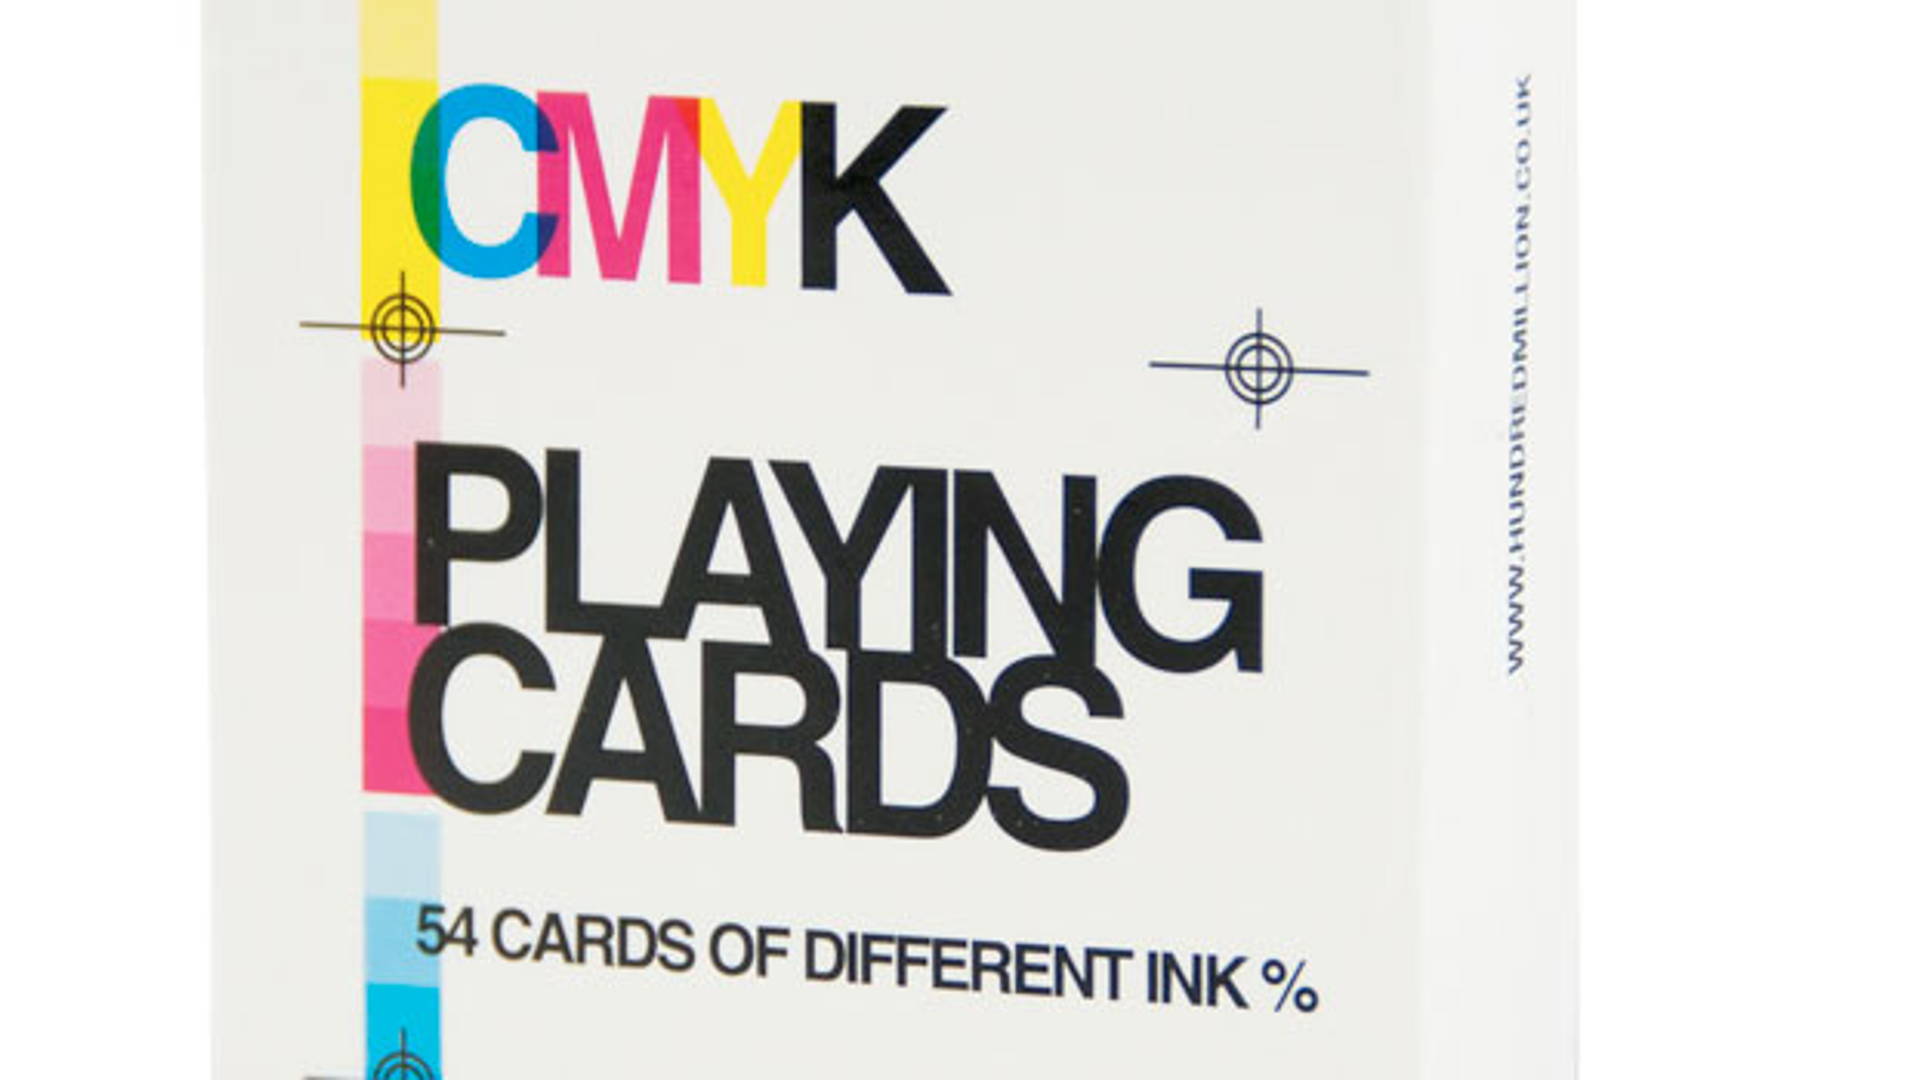 Featured image for CMYK Playing Cards 